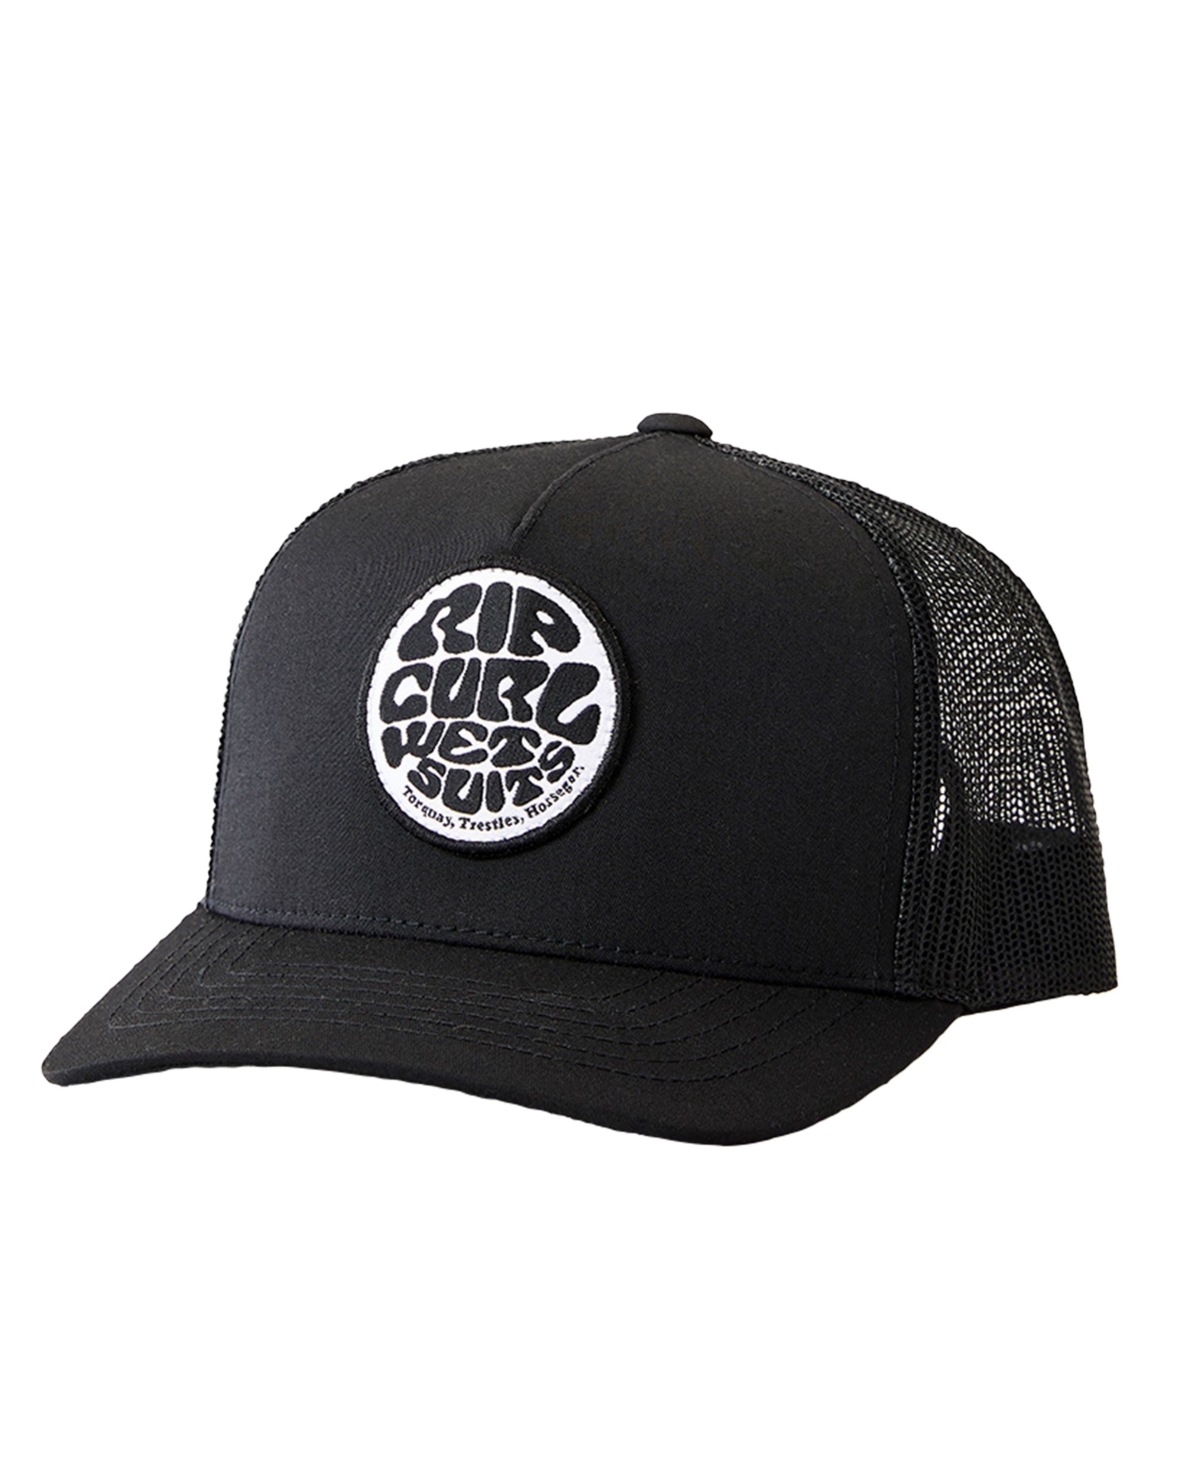 Rip Curl Men's Icon's Trucker Hat (Black/White) $6.65 + Free Store Pickup at Macy's or FS on $25+